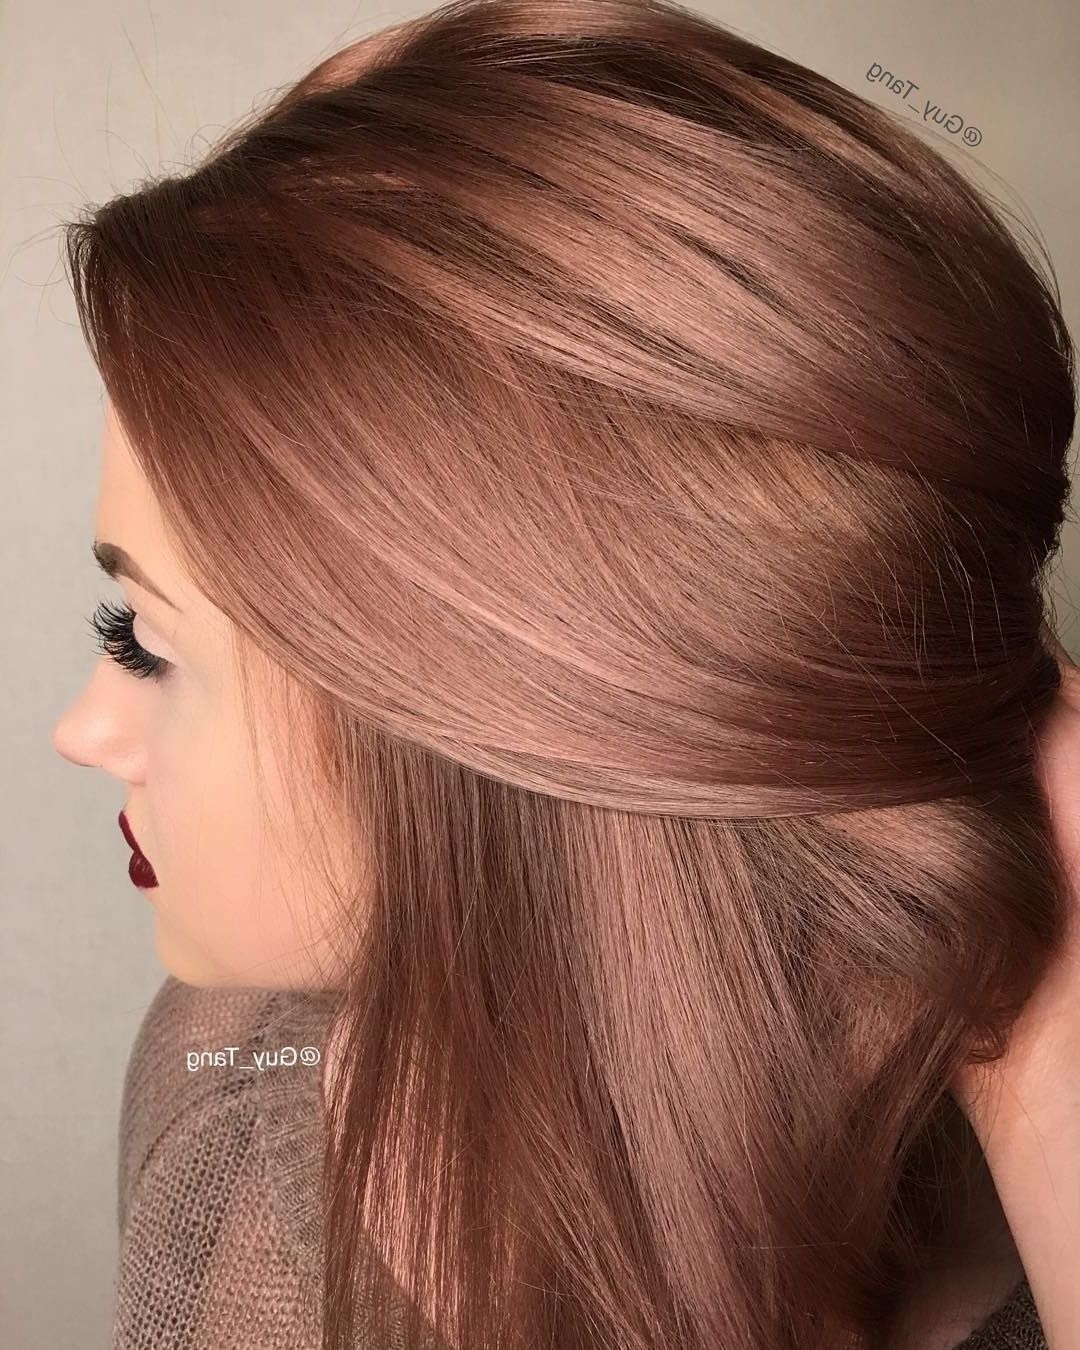 Concrete Proof That Rose Gold Is The Still Perfect Rainbow Hair Hue In Famous Golden Bronze Blonde Hairstyles (View 20 of 20)